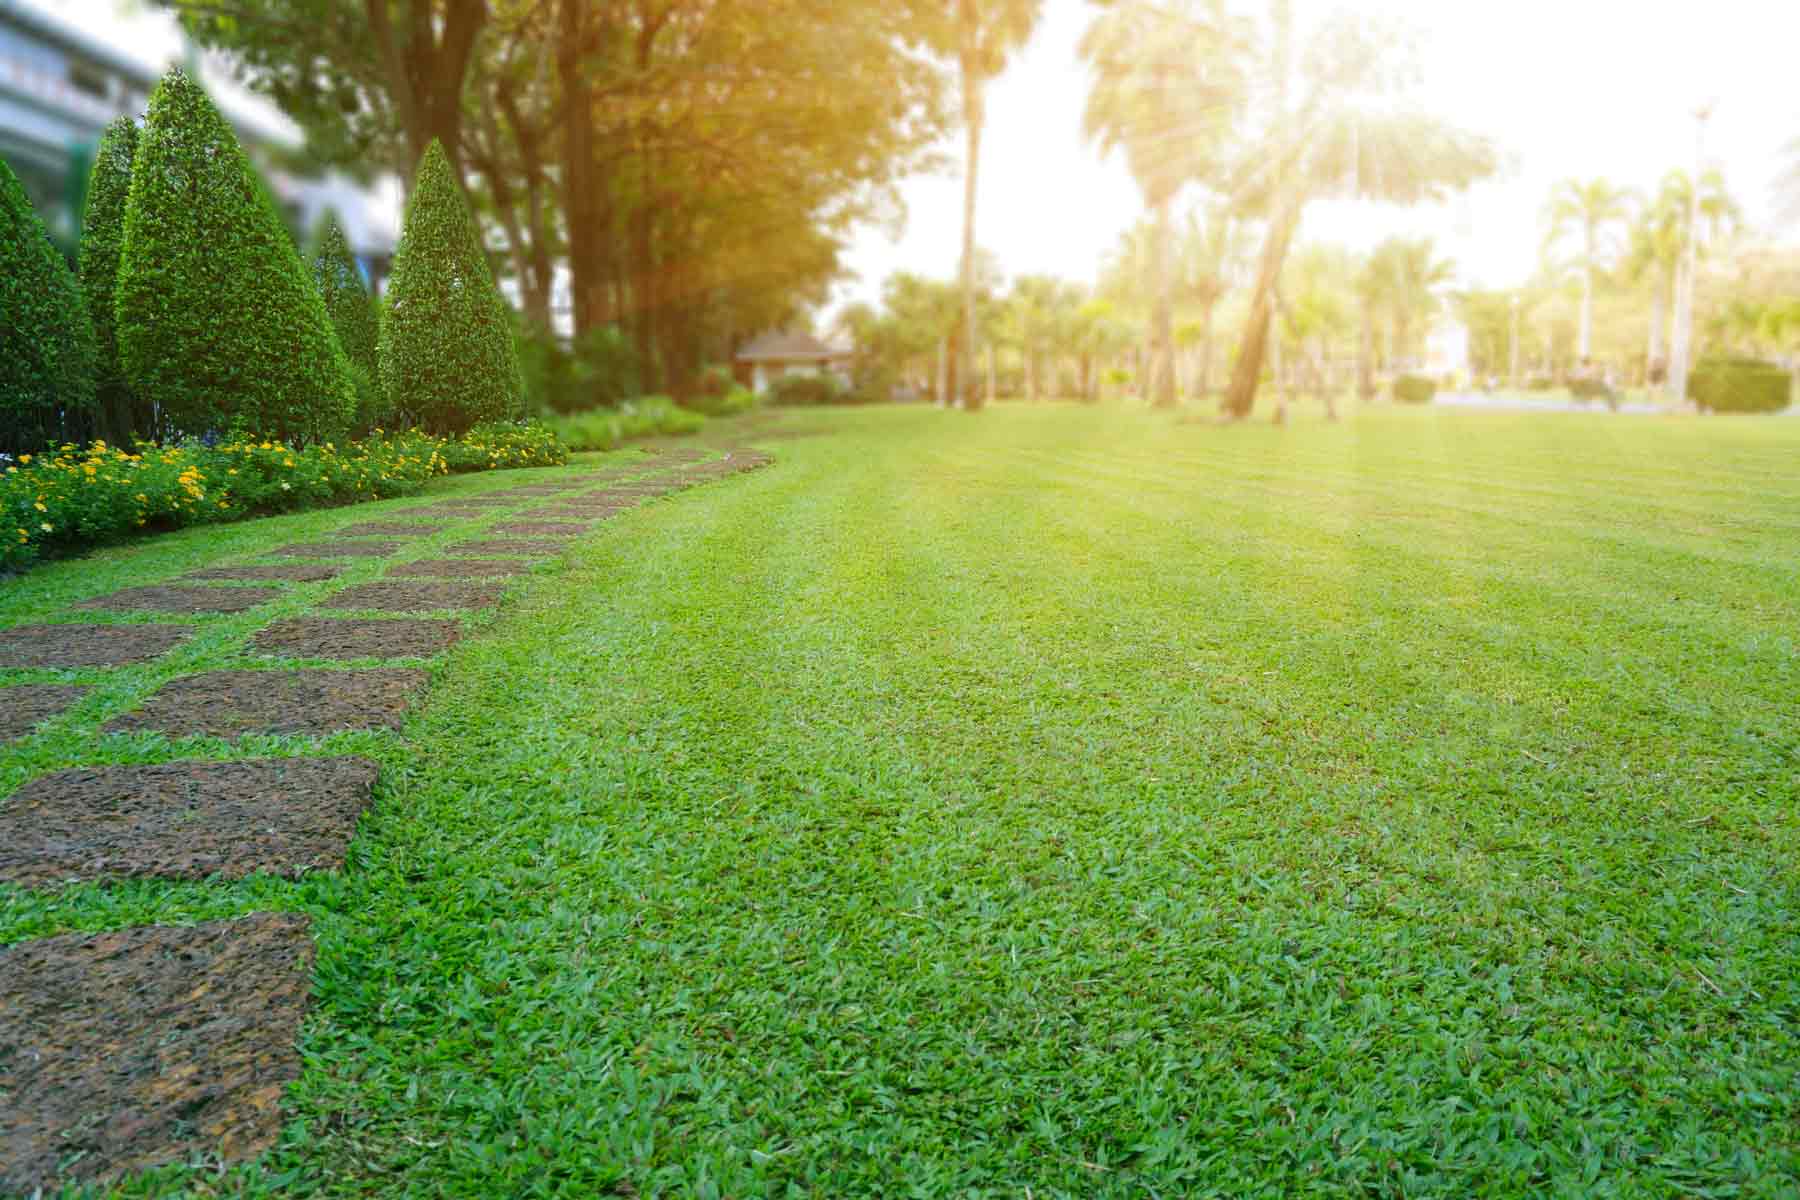 Find a lawn mowing service near you